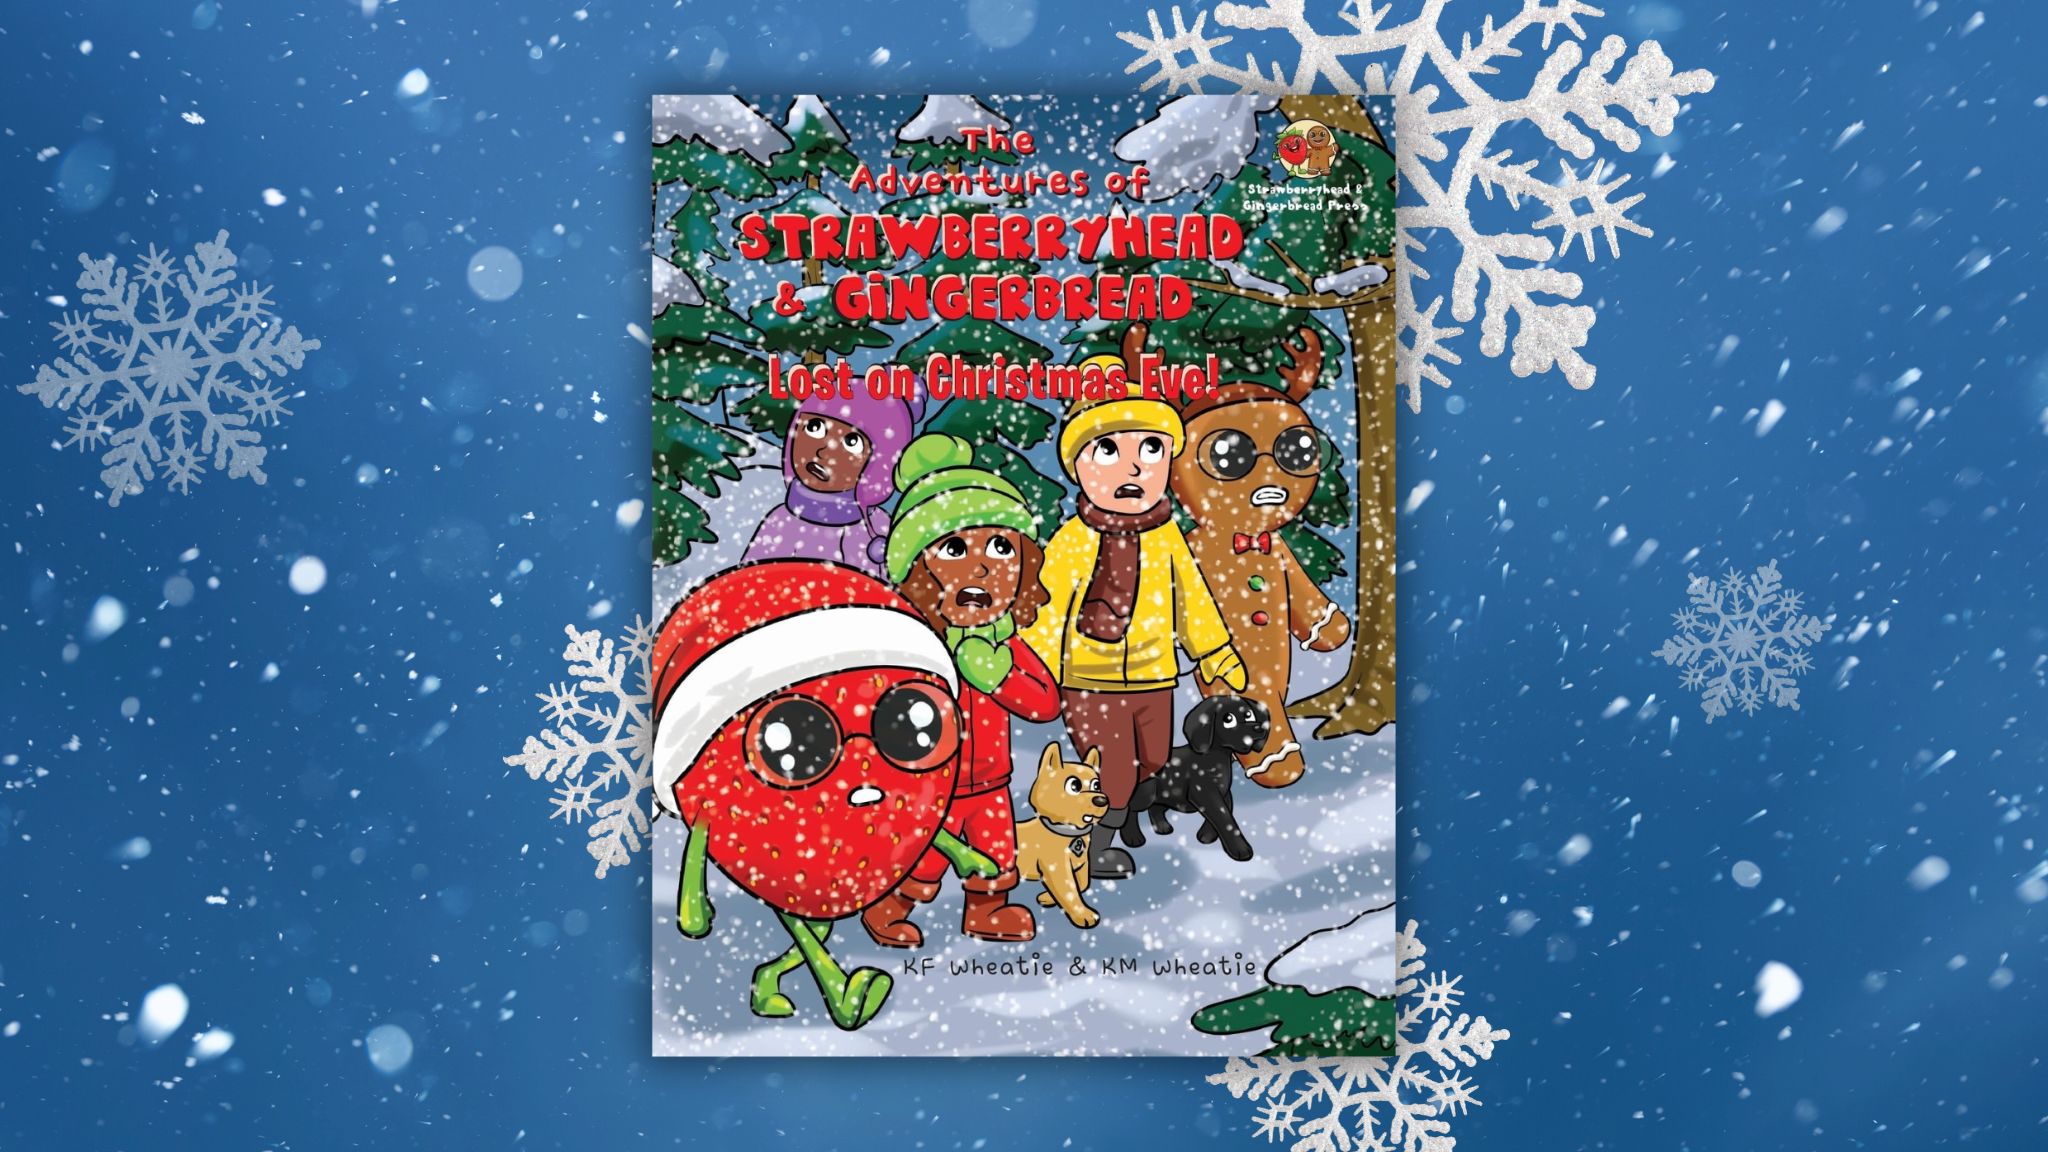 The Adventures of Strawberryhead & Gingerbread: Lost on Christmas Eve by KF Wheatie & KM Wheatie